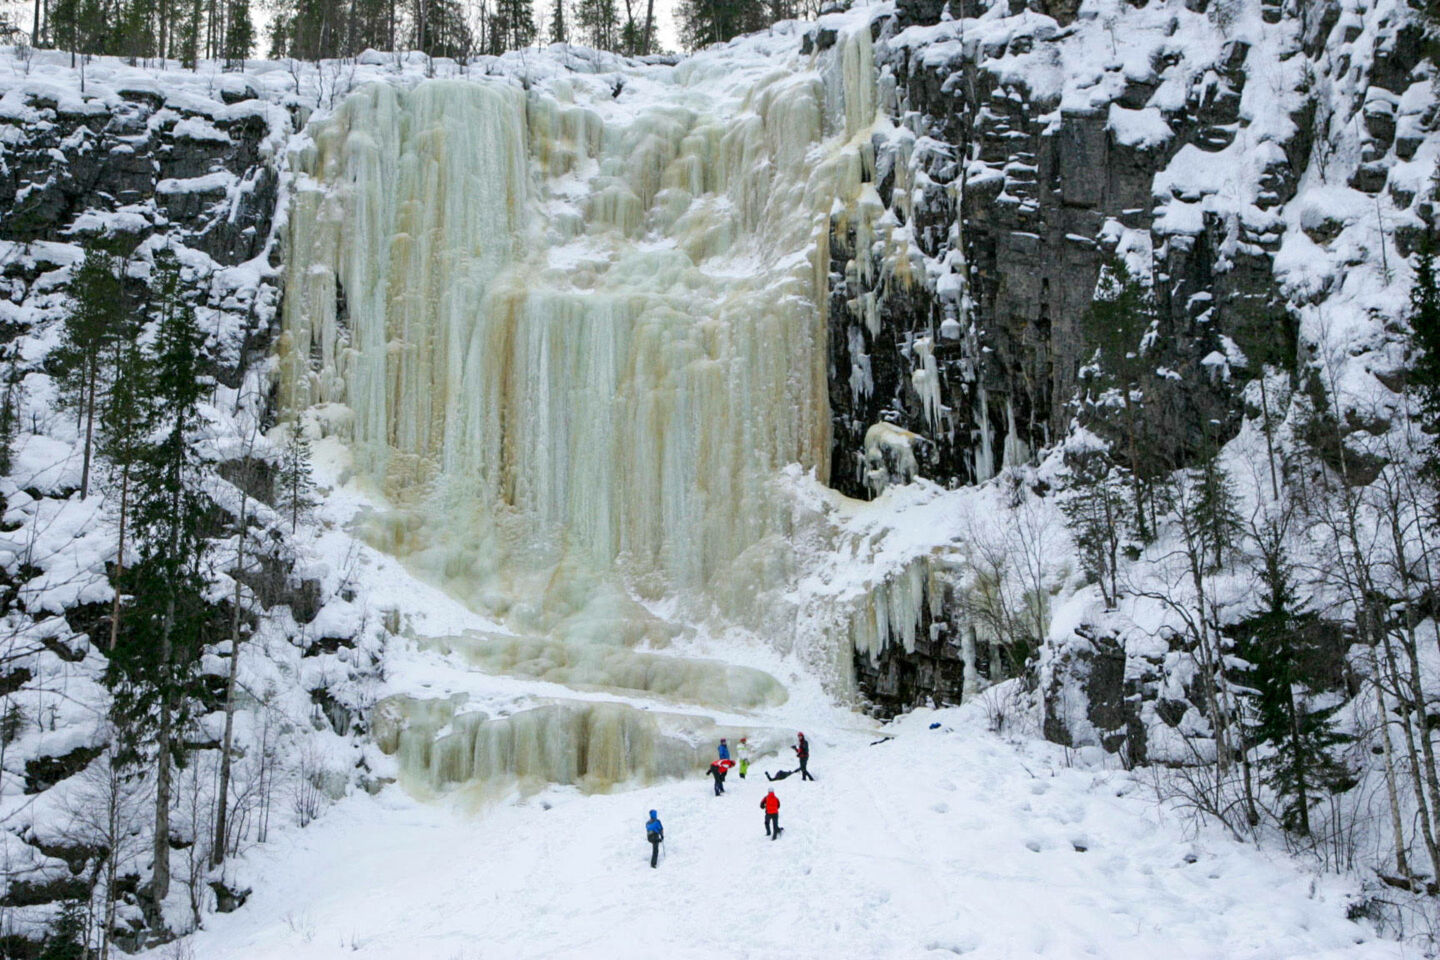 Preparing to climb the frozen waterfall in the Korouoma Canyon in Posio, a Finnish Lapland filming location